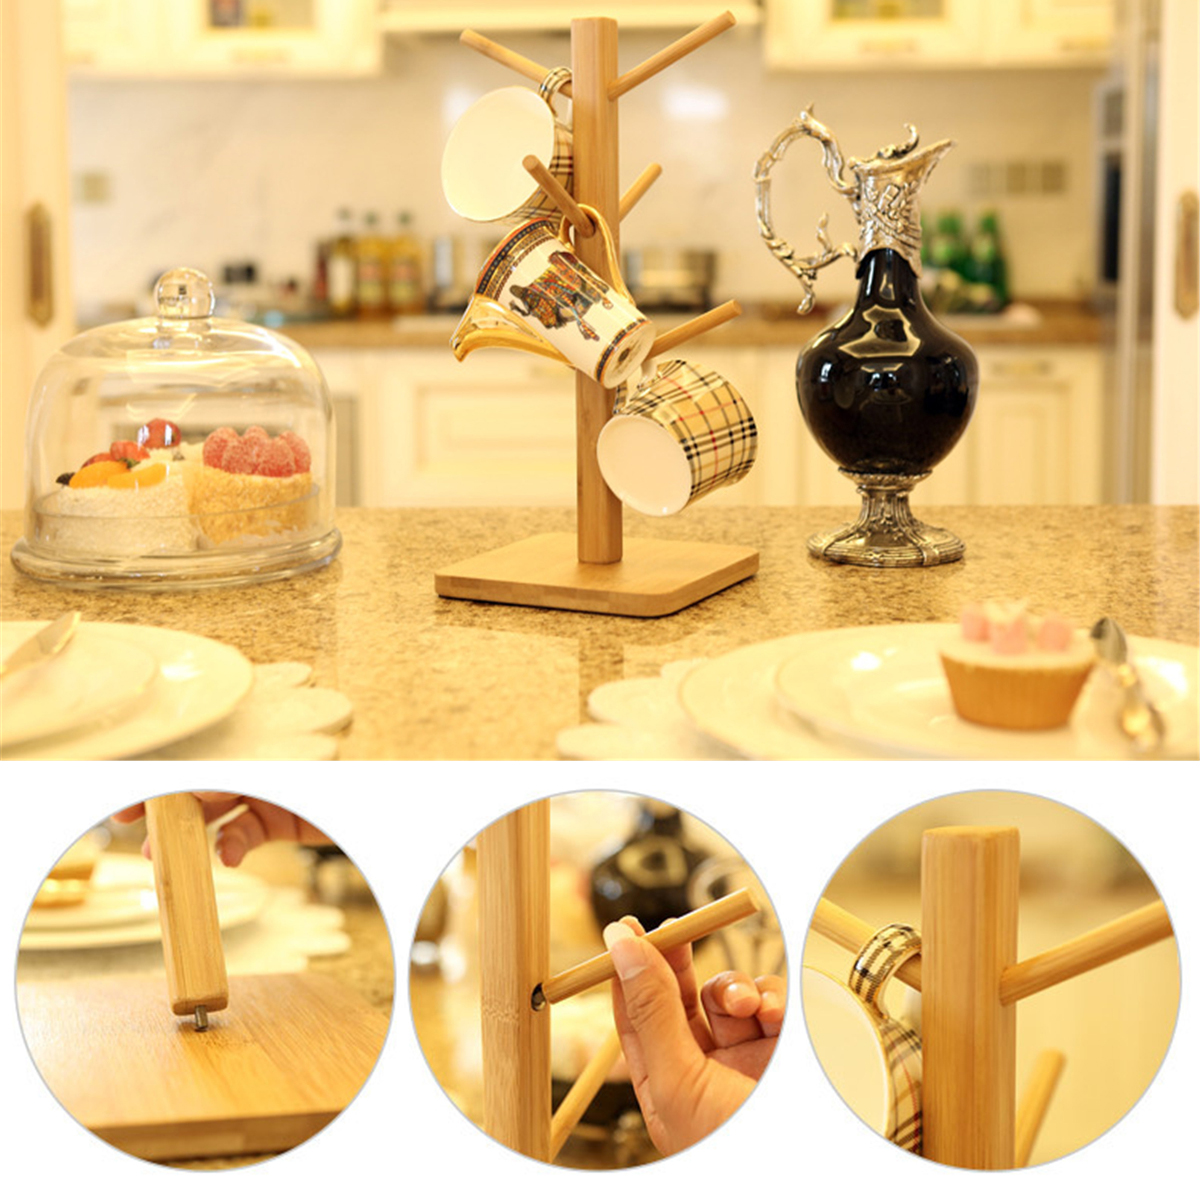 Wooden-Cup-Holder-Teacup-Mug-Drain-Rack-Stand-6-Cups-Drain-Cup-Hanging-Stand-Coffee-Cup-Display-Stan-1777089-7